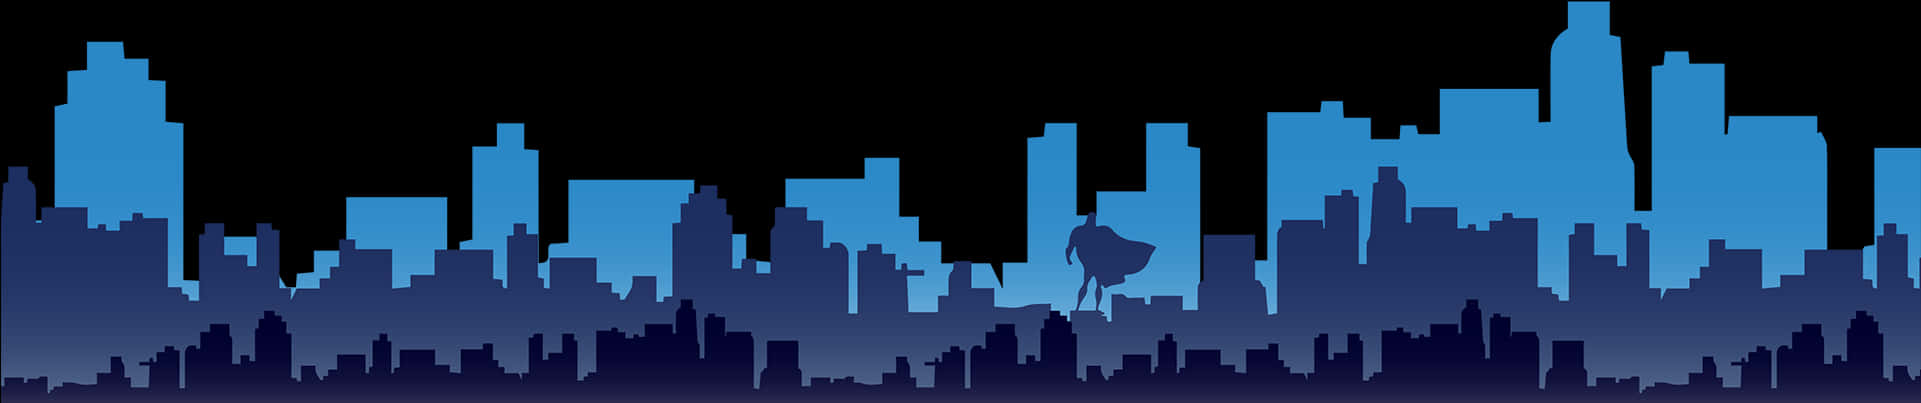 Blue Silhouette Skyline PNG image